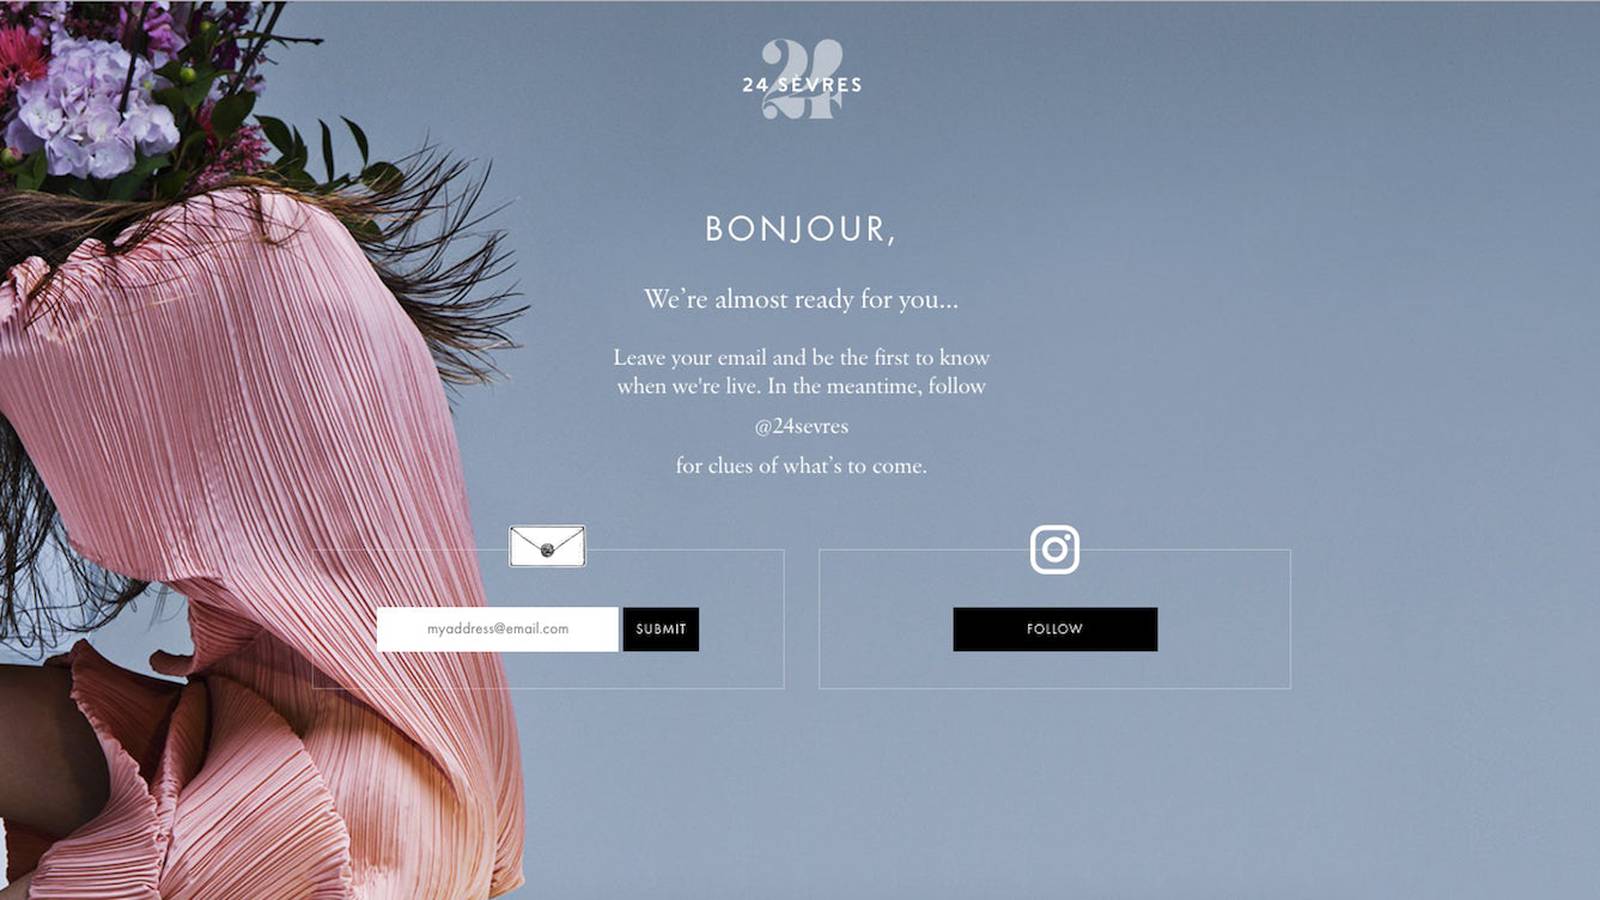 Launch of 24 Sèvres, the new online shopping experience - LVMH